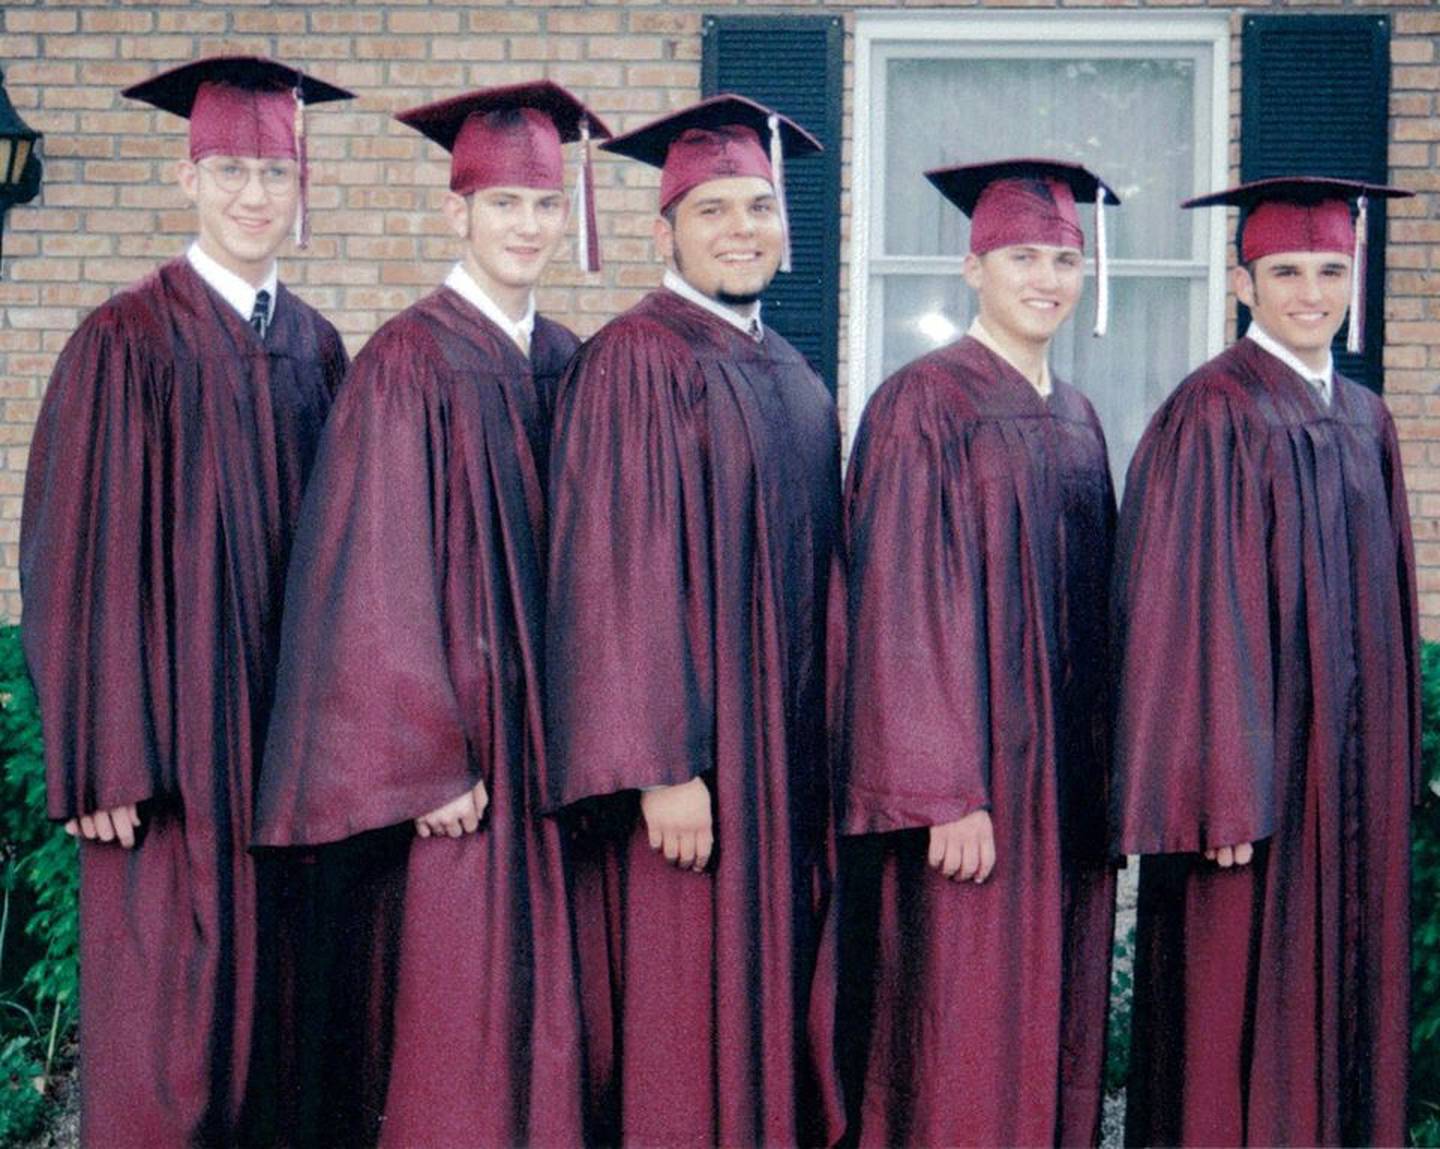 Rob Schwiesow and Nick Wickman pictured with friends at their graduation from Morris Community High School.